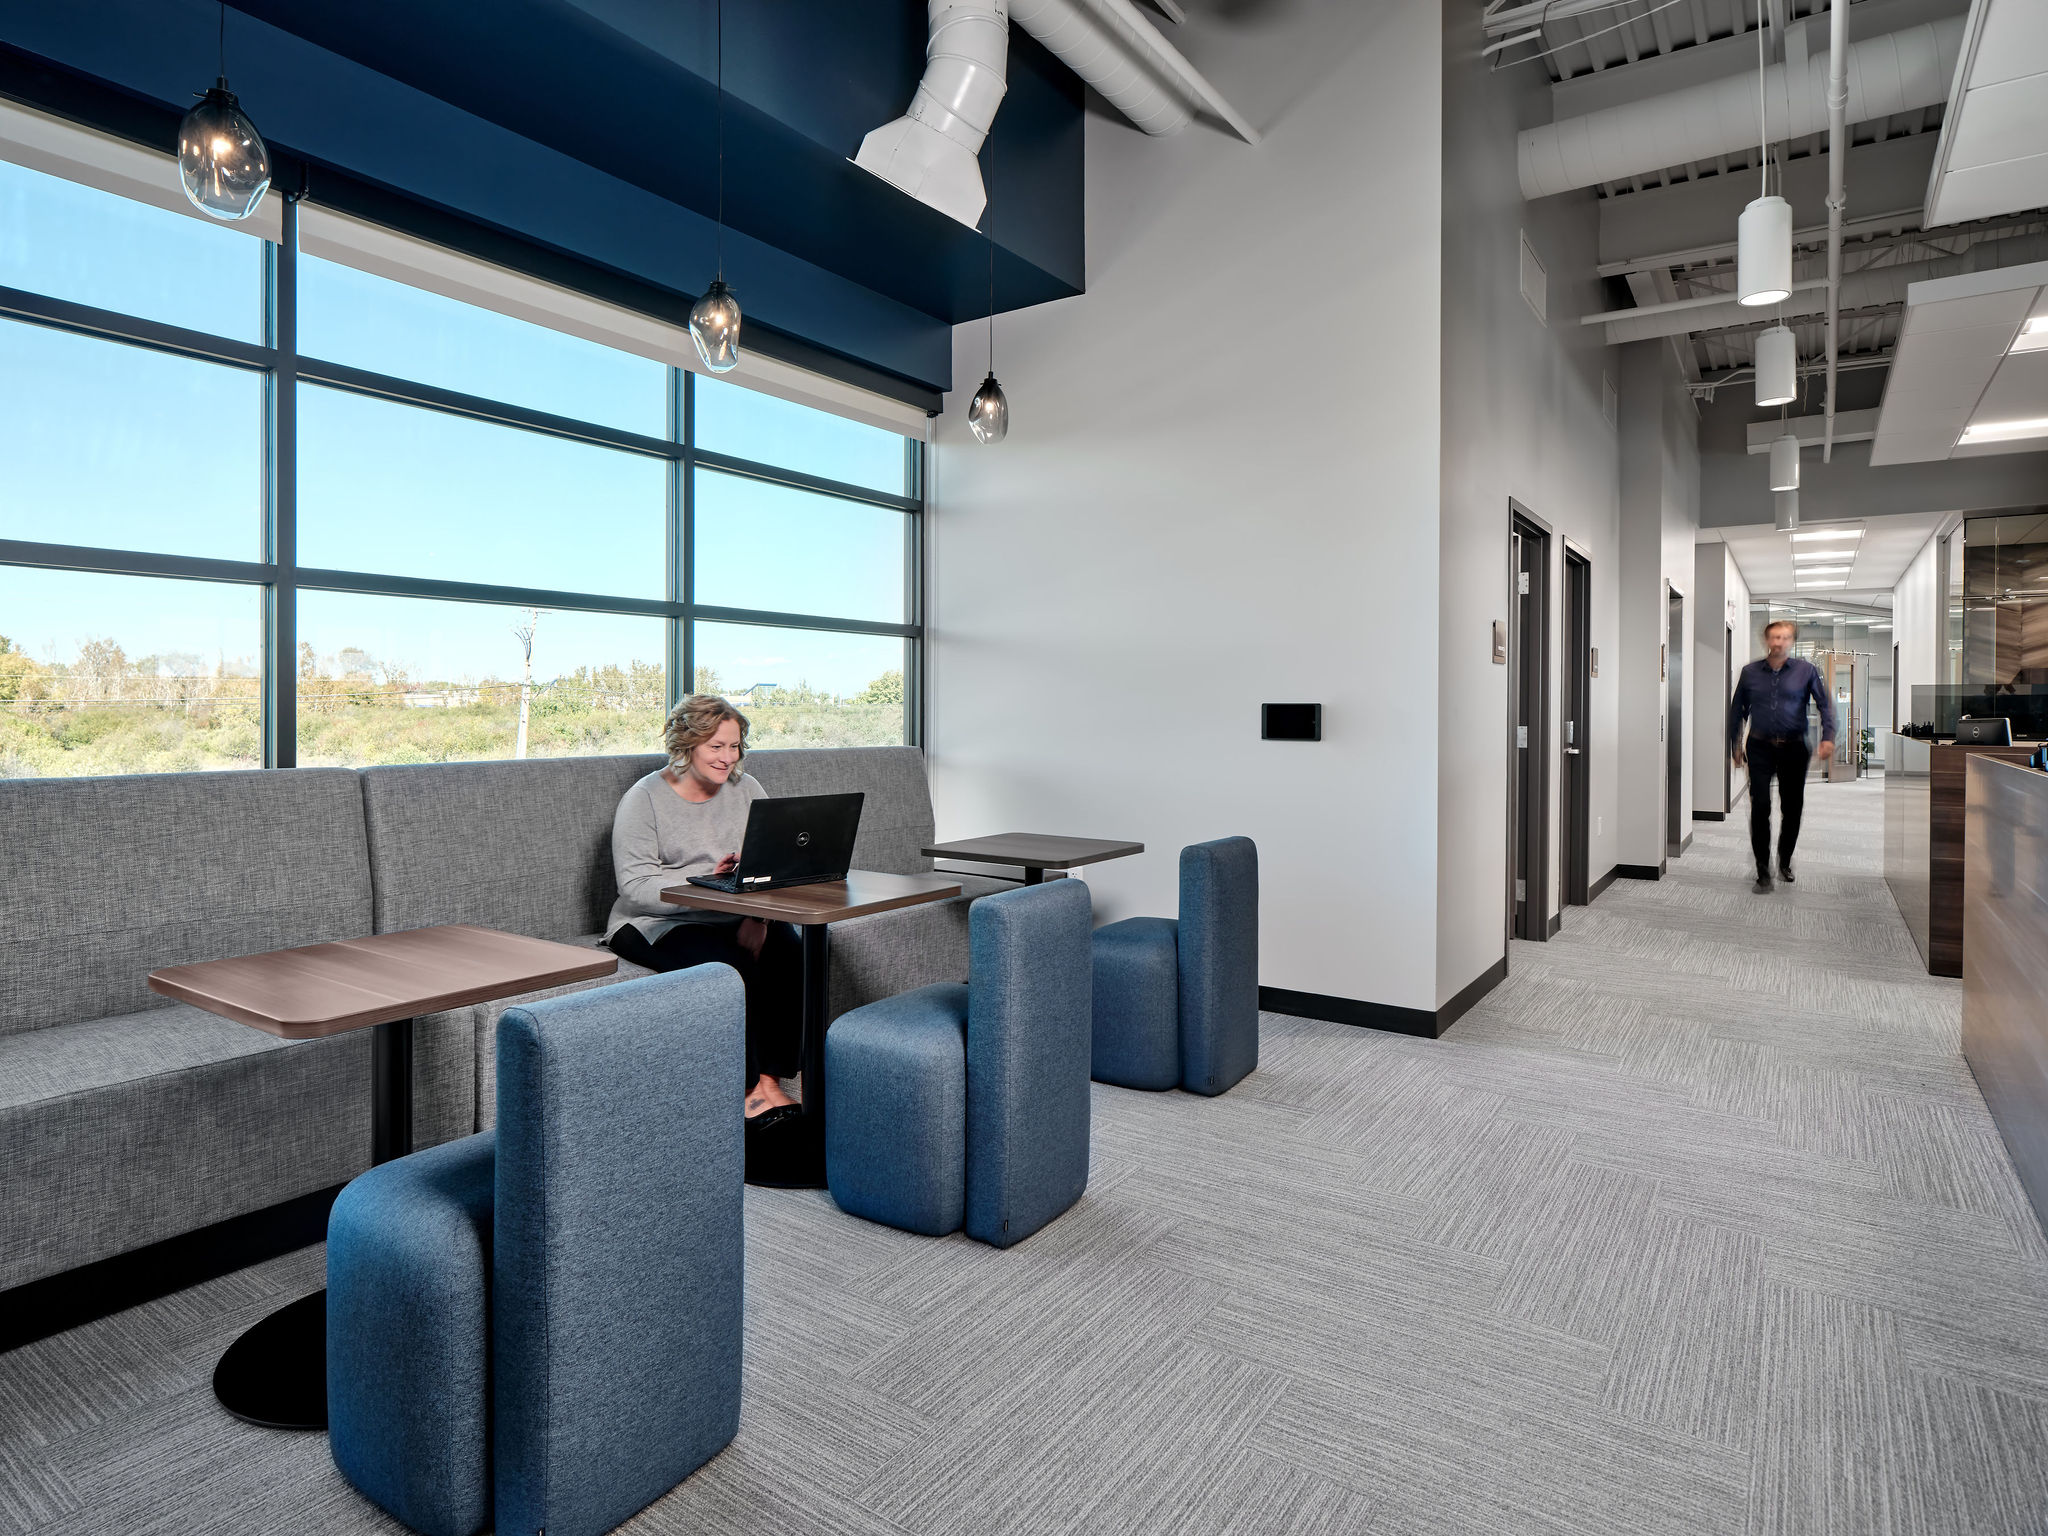 Break out space for employees in the back office